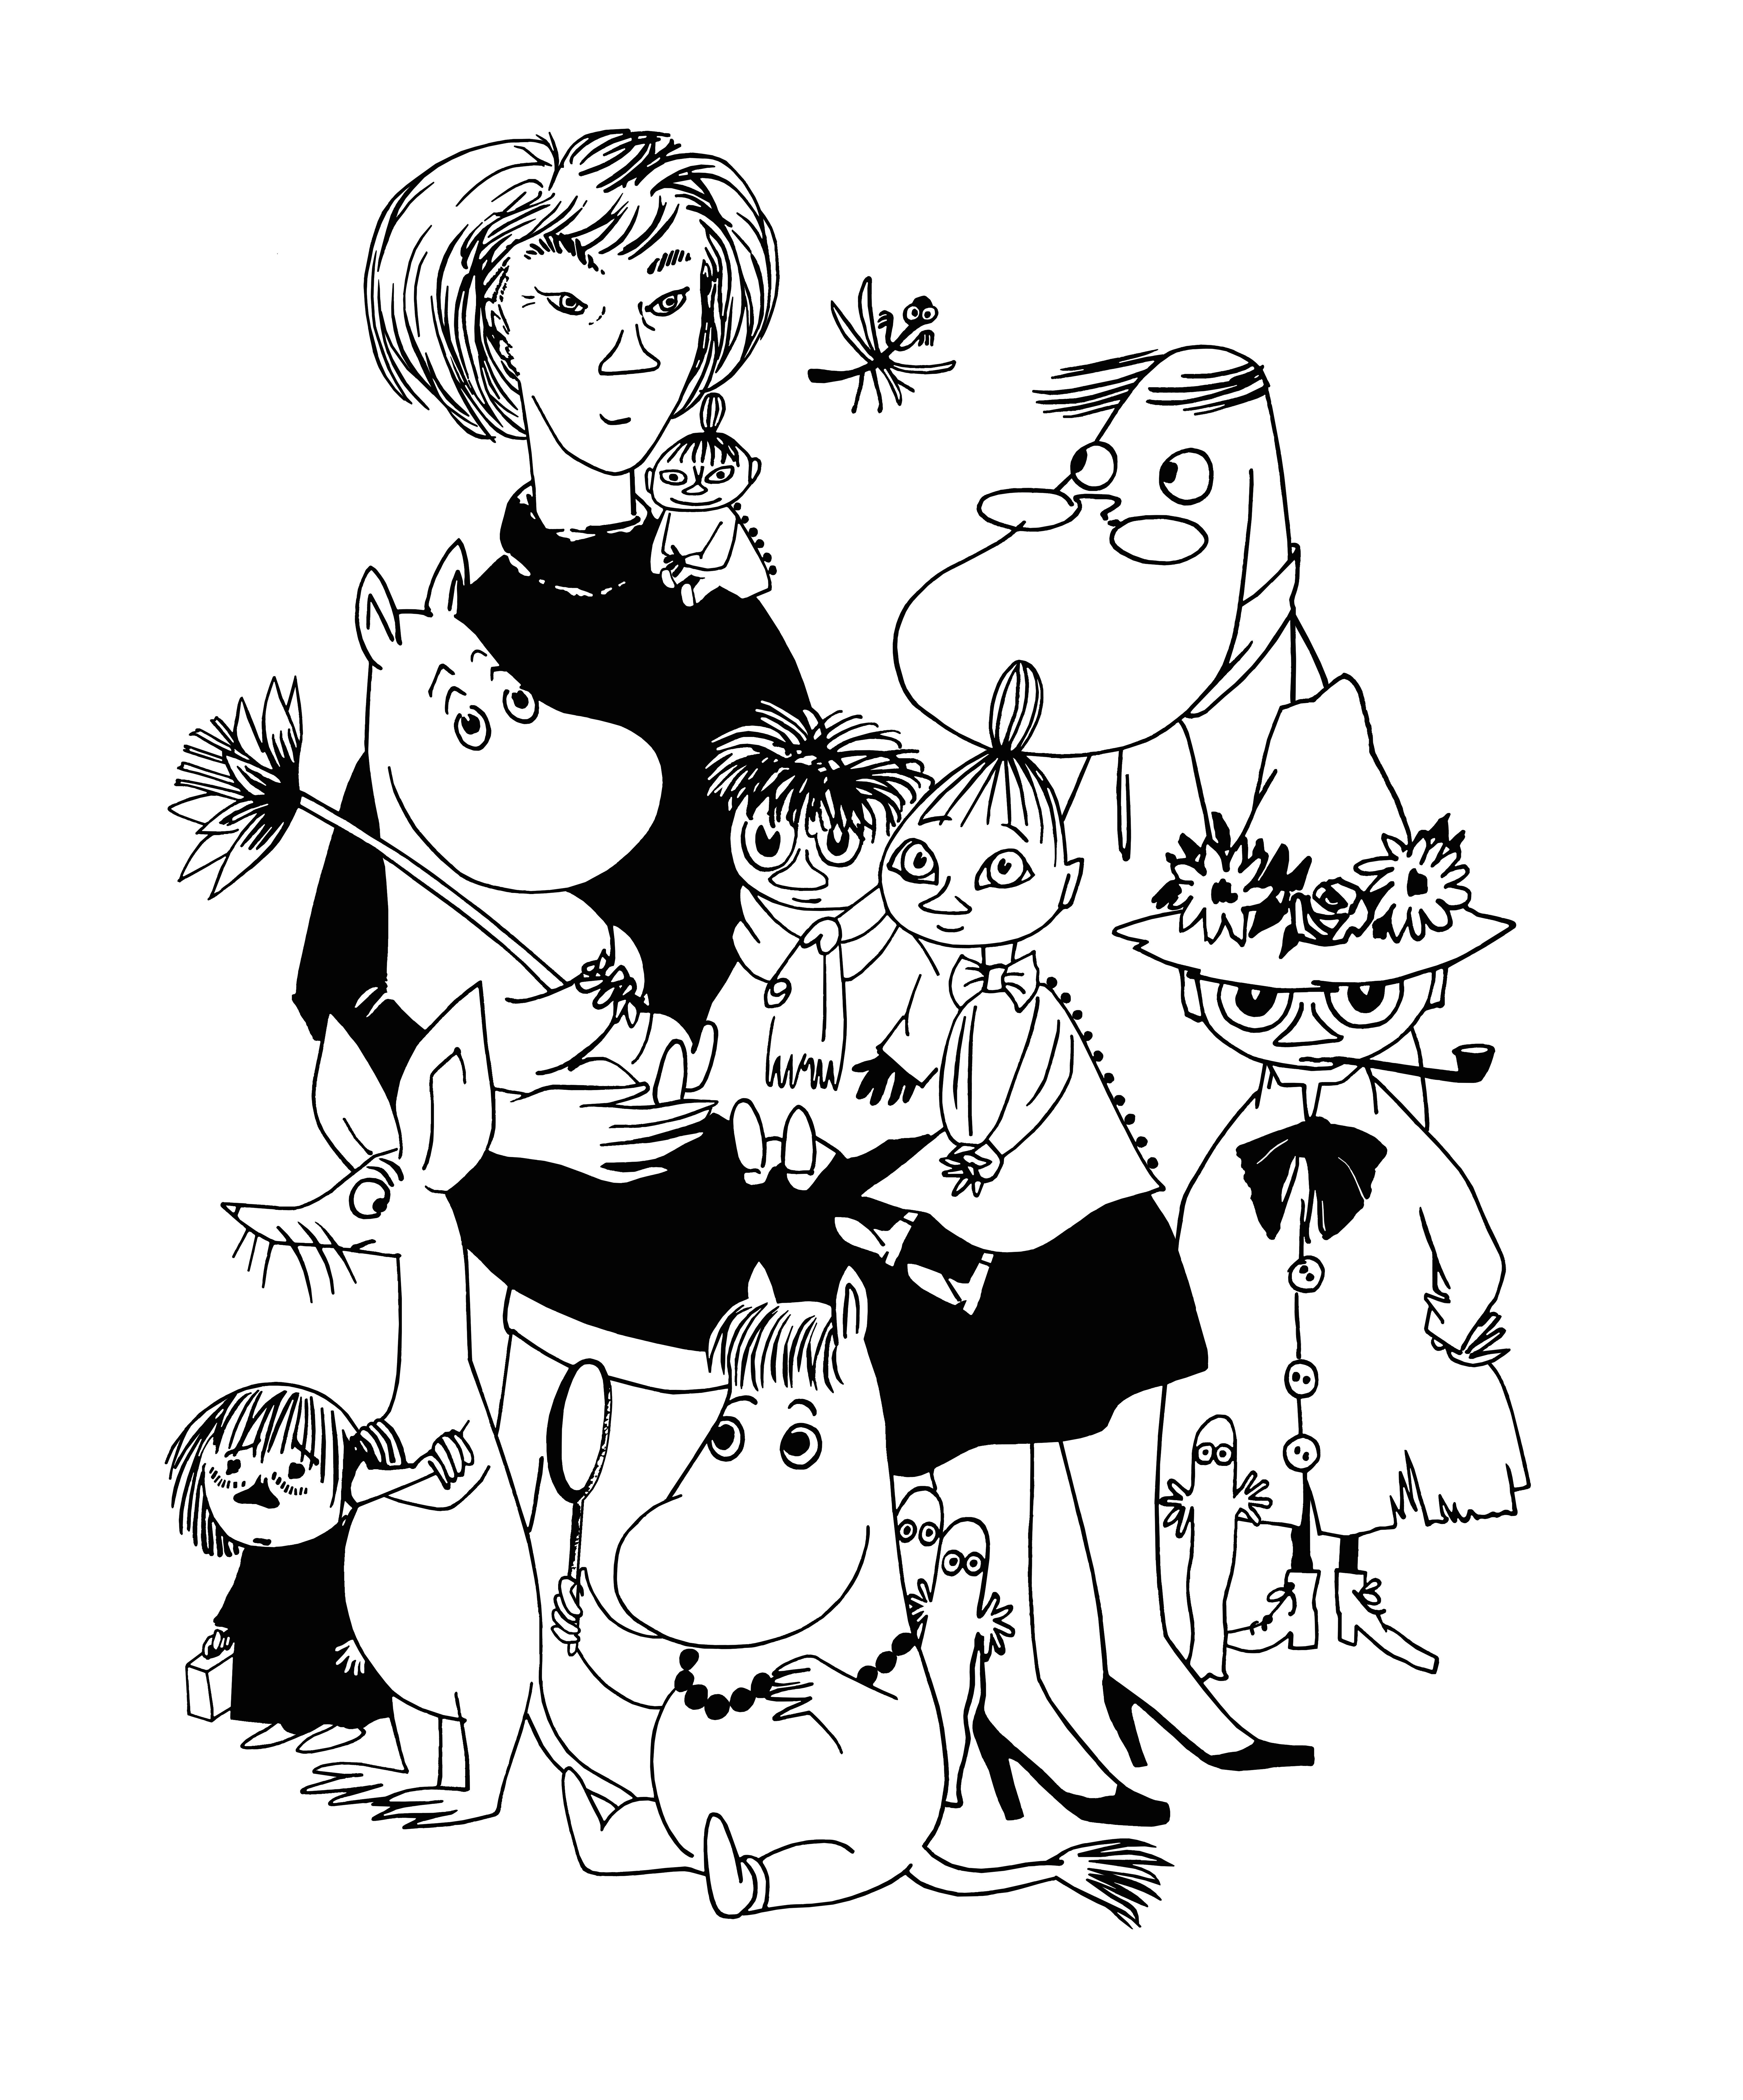 tove jansson self portrait with some the characters she created